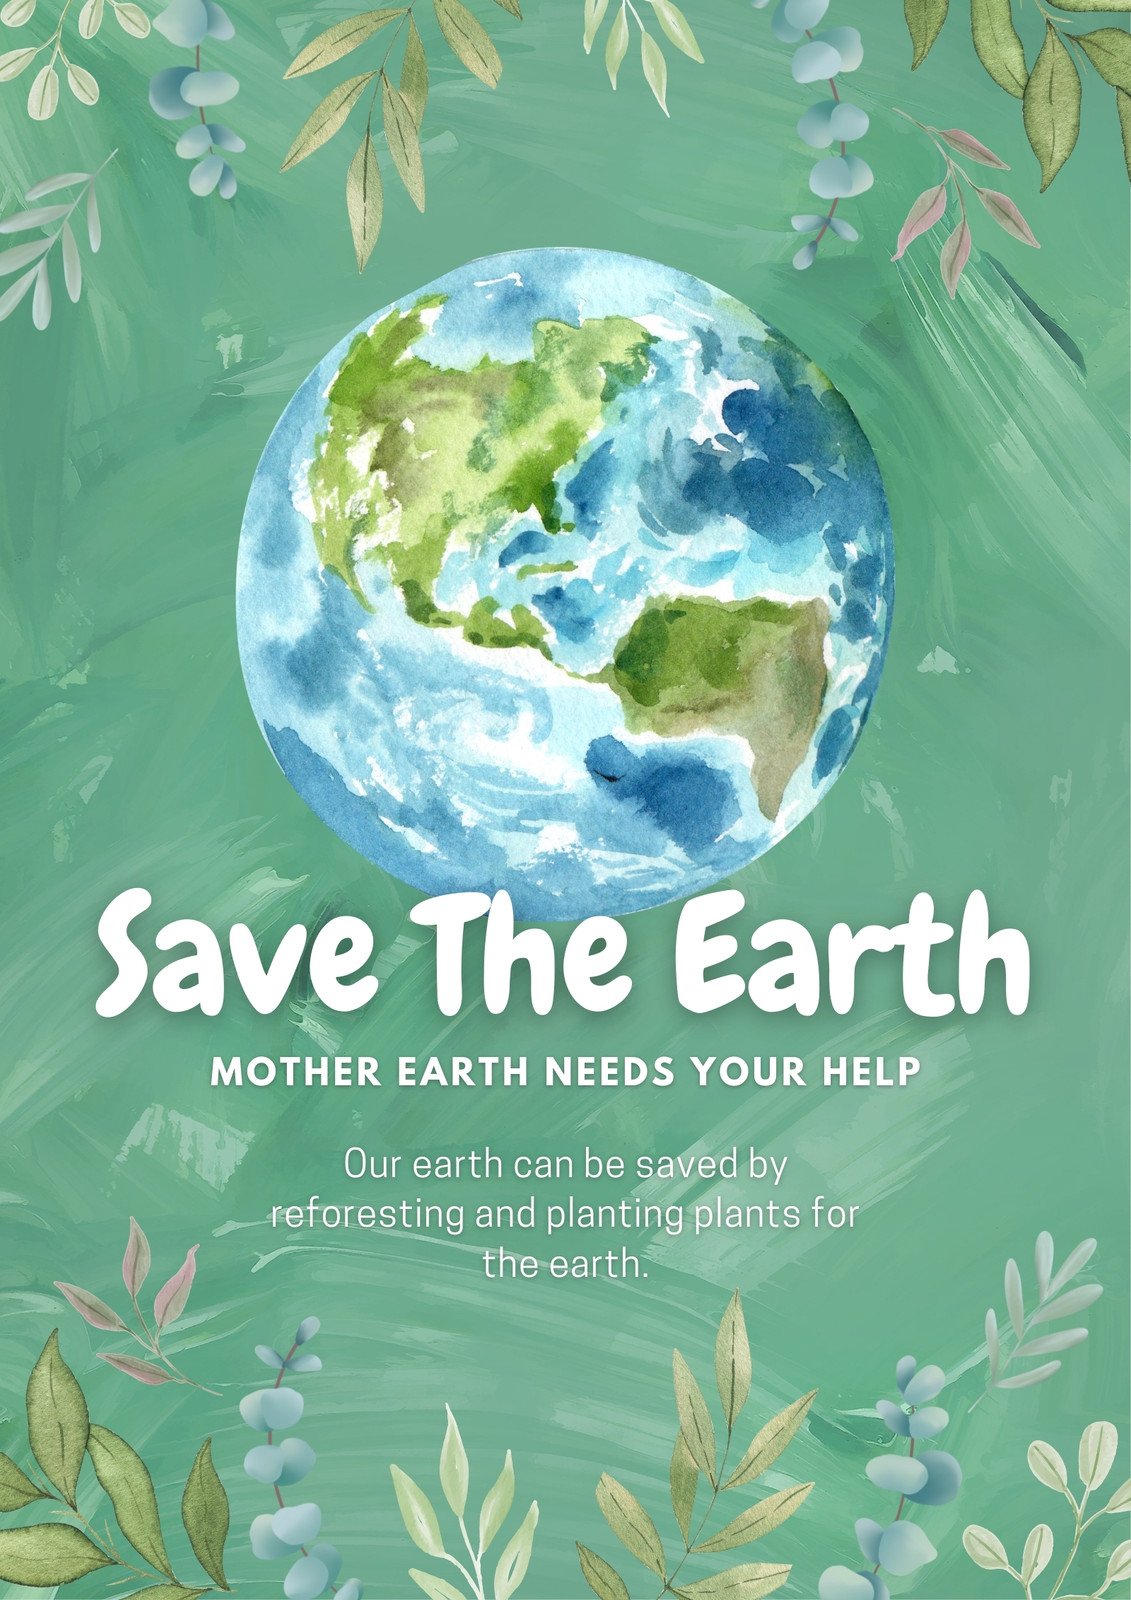 Free printable, customizable Earth Day poster templates | Canva